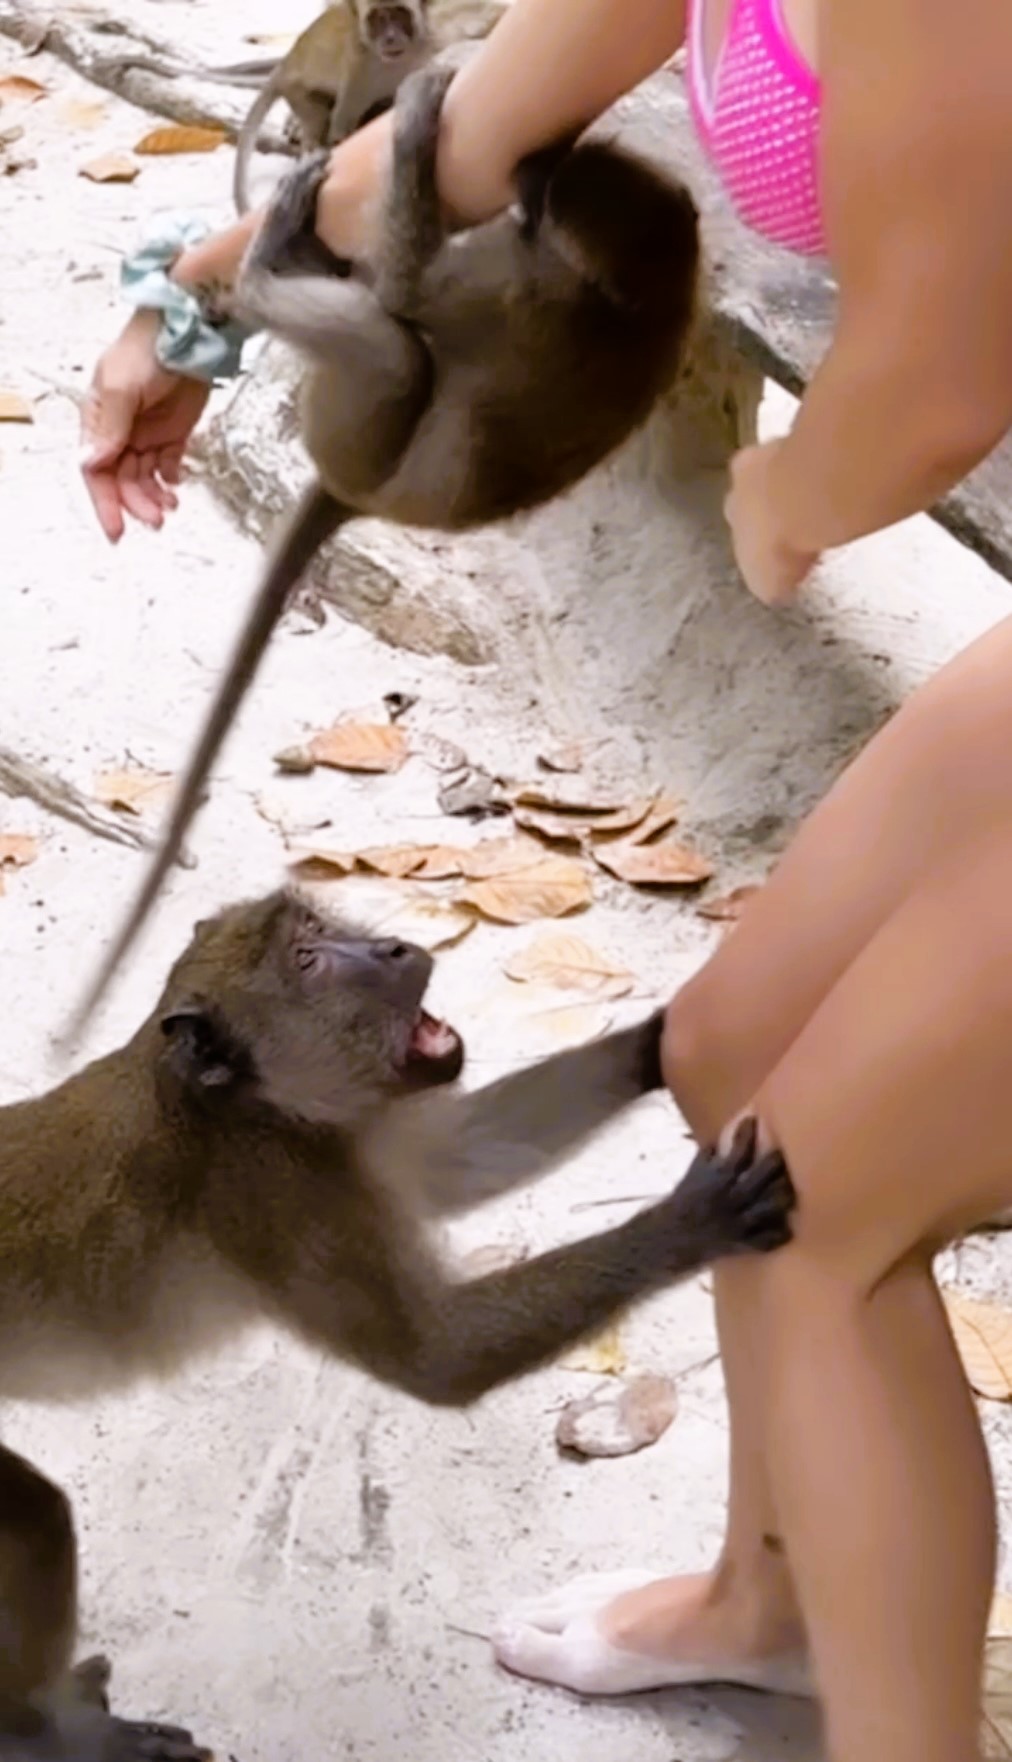 video grab of the moment when Emmy Russ was being attracted and bitten by group of monkeys while on a holiday vacation.